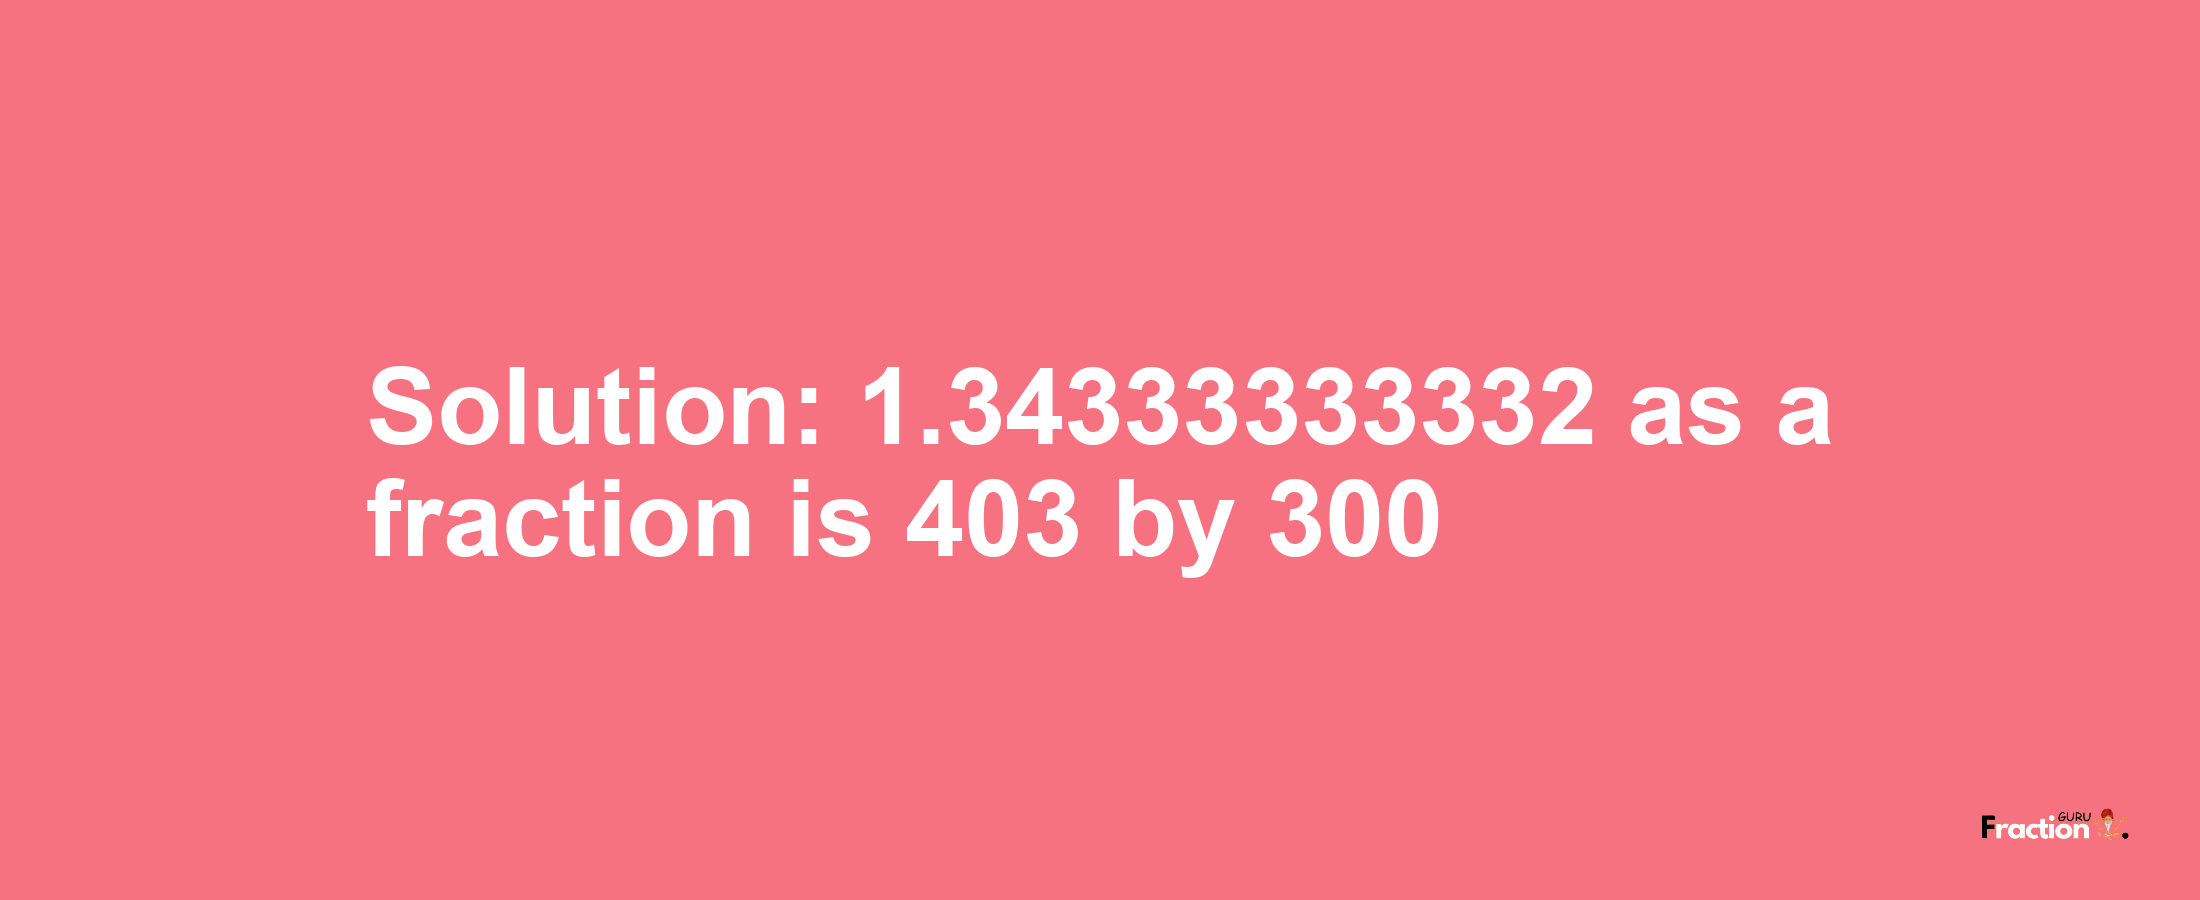 Solution:1.34333333332 as a fraction is 403/300